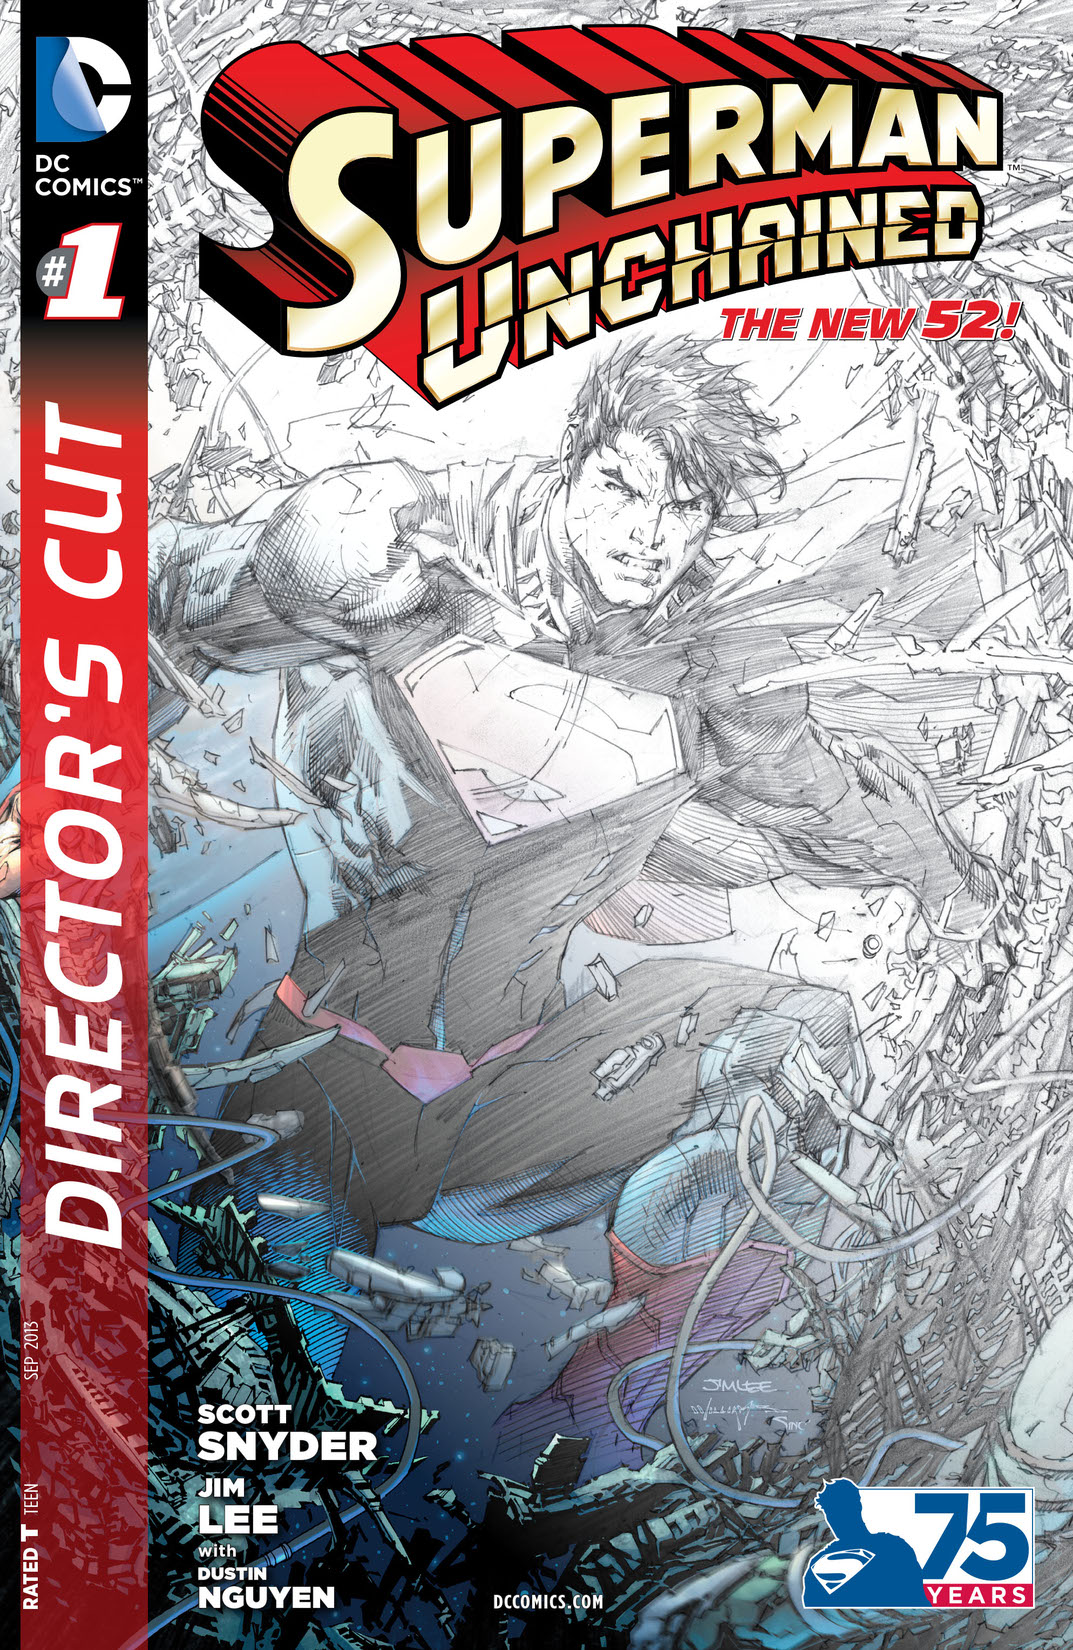 Superman Unchained Director's Cut #1 preview images